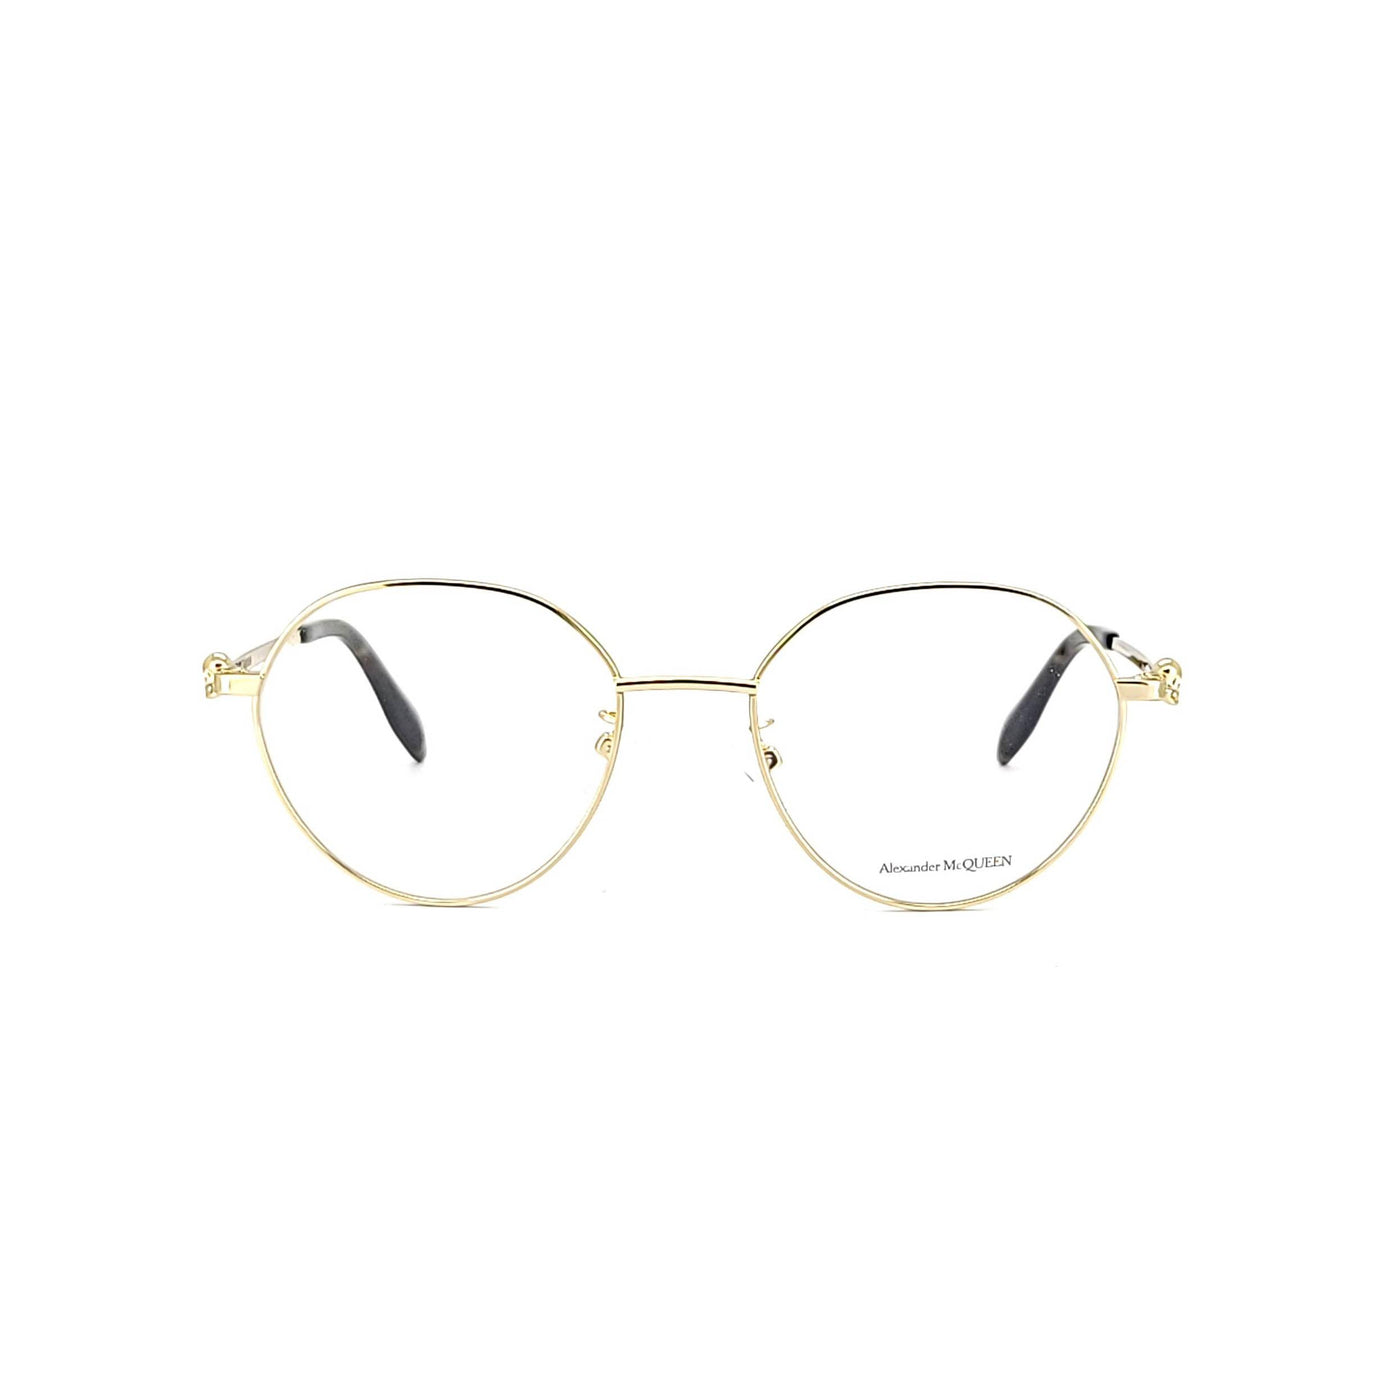 Alexander McQueen AM 0319O/002 | Eyeglasses with FREE Anti Radiation Lenses - Vision Express Optical Philippines